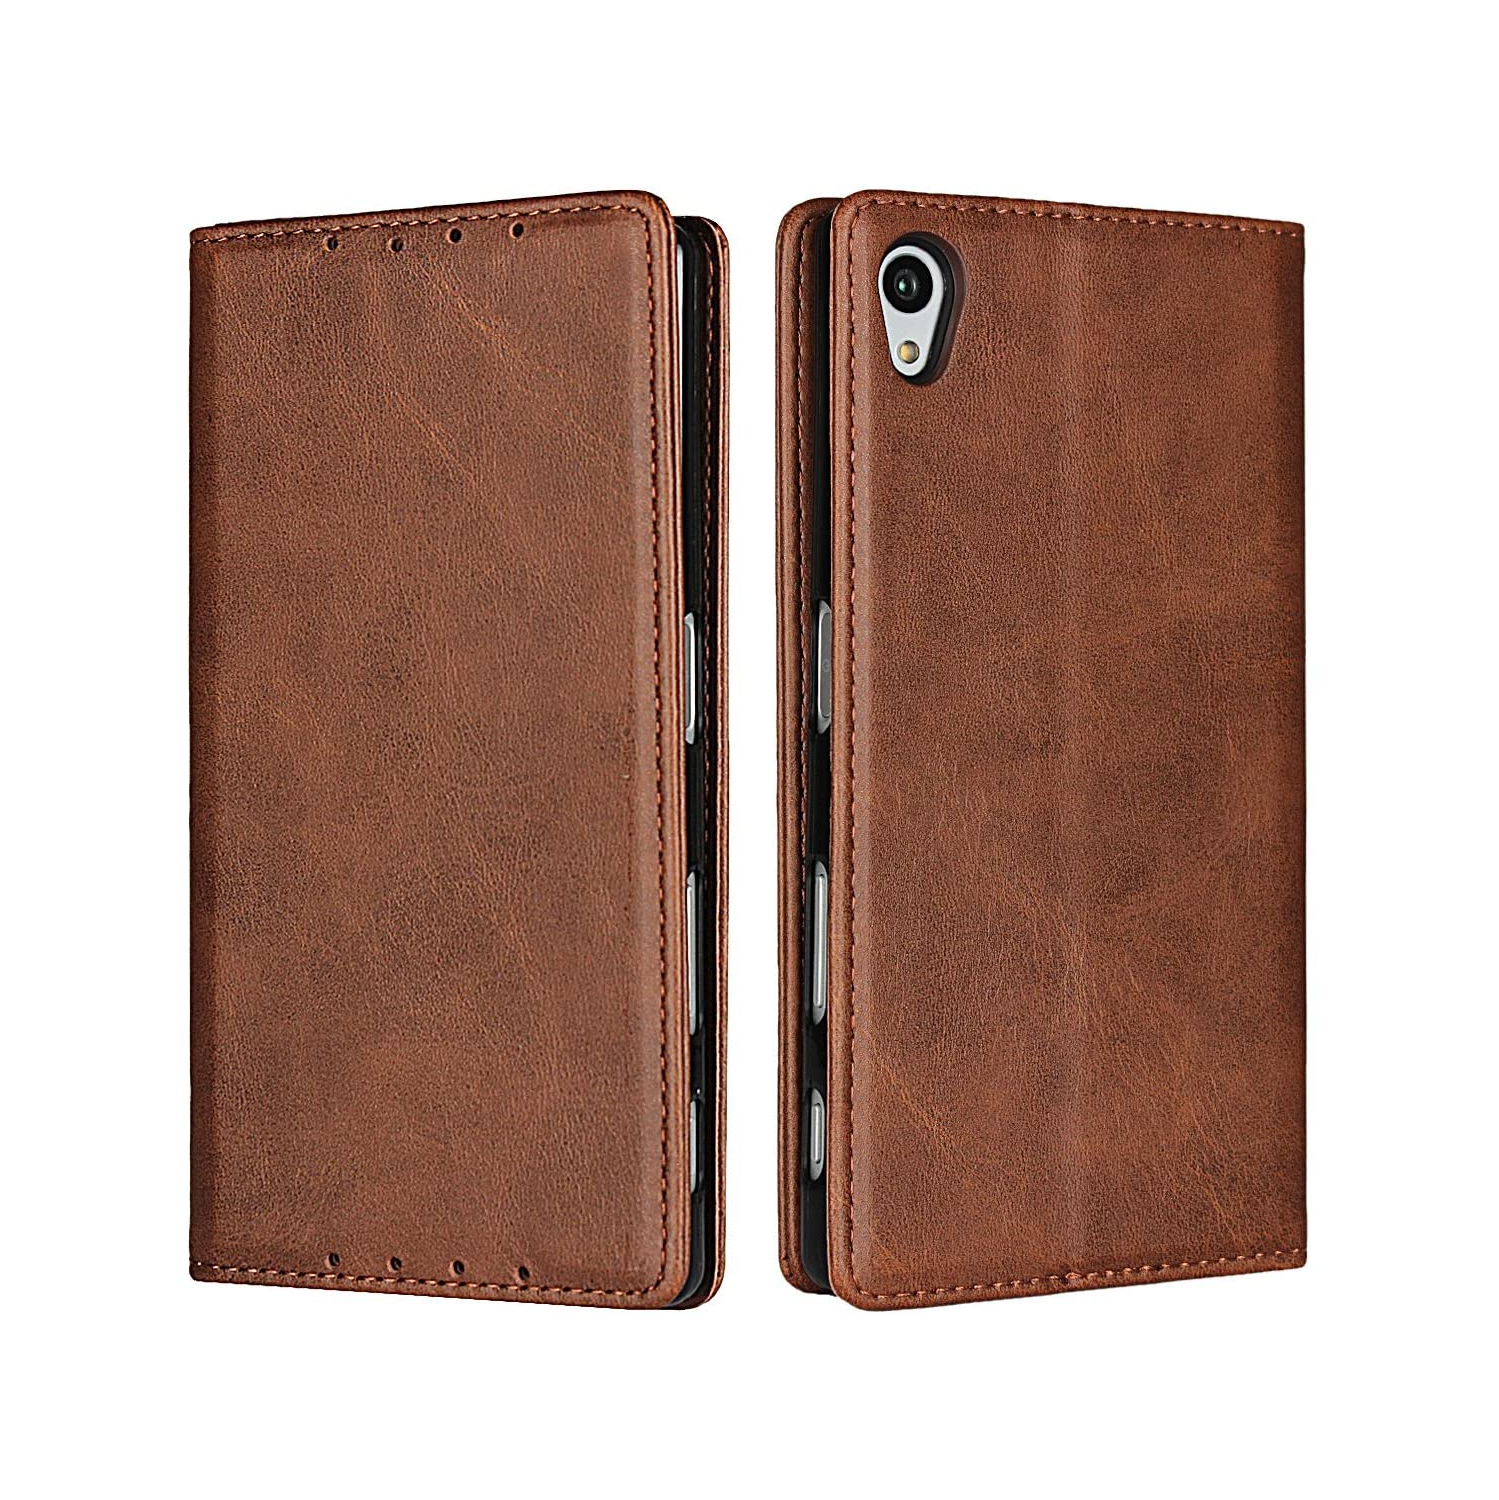 Compatible with Sony Xperia Z5 Case, Premium Magnetic Wallet Leather Case, Exquisite Texture Leather Soft